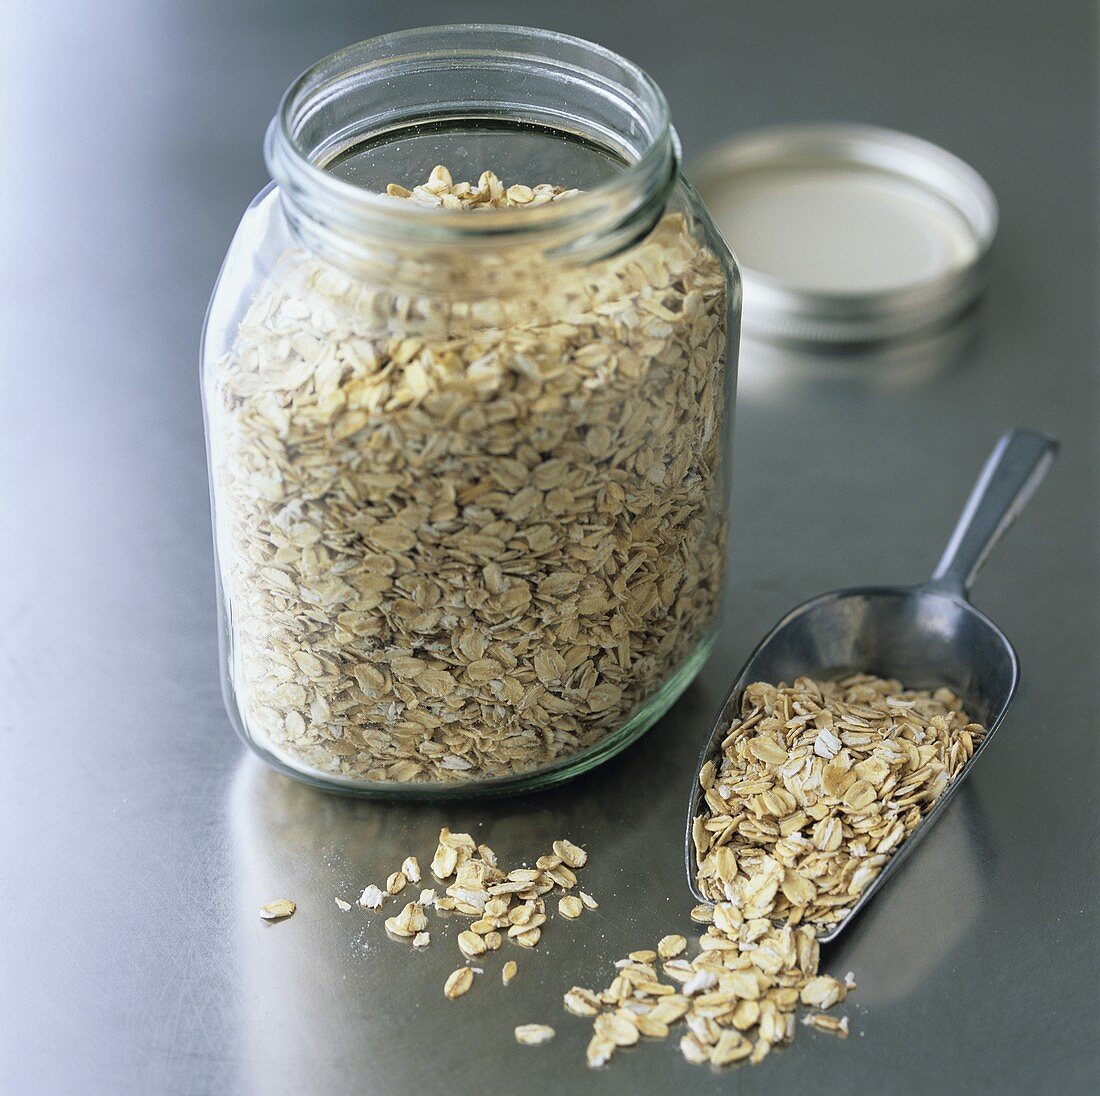 Rolled oats in a screw-top jar and a small scoop